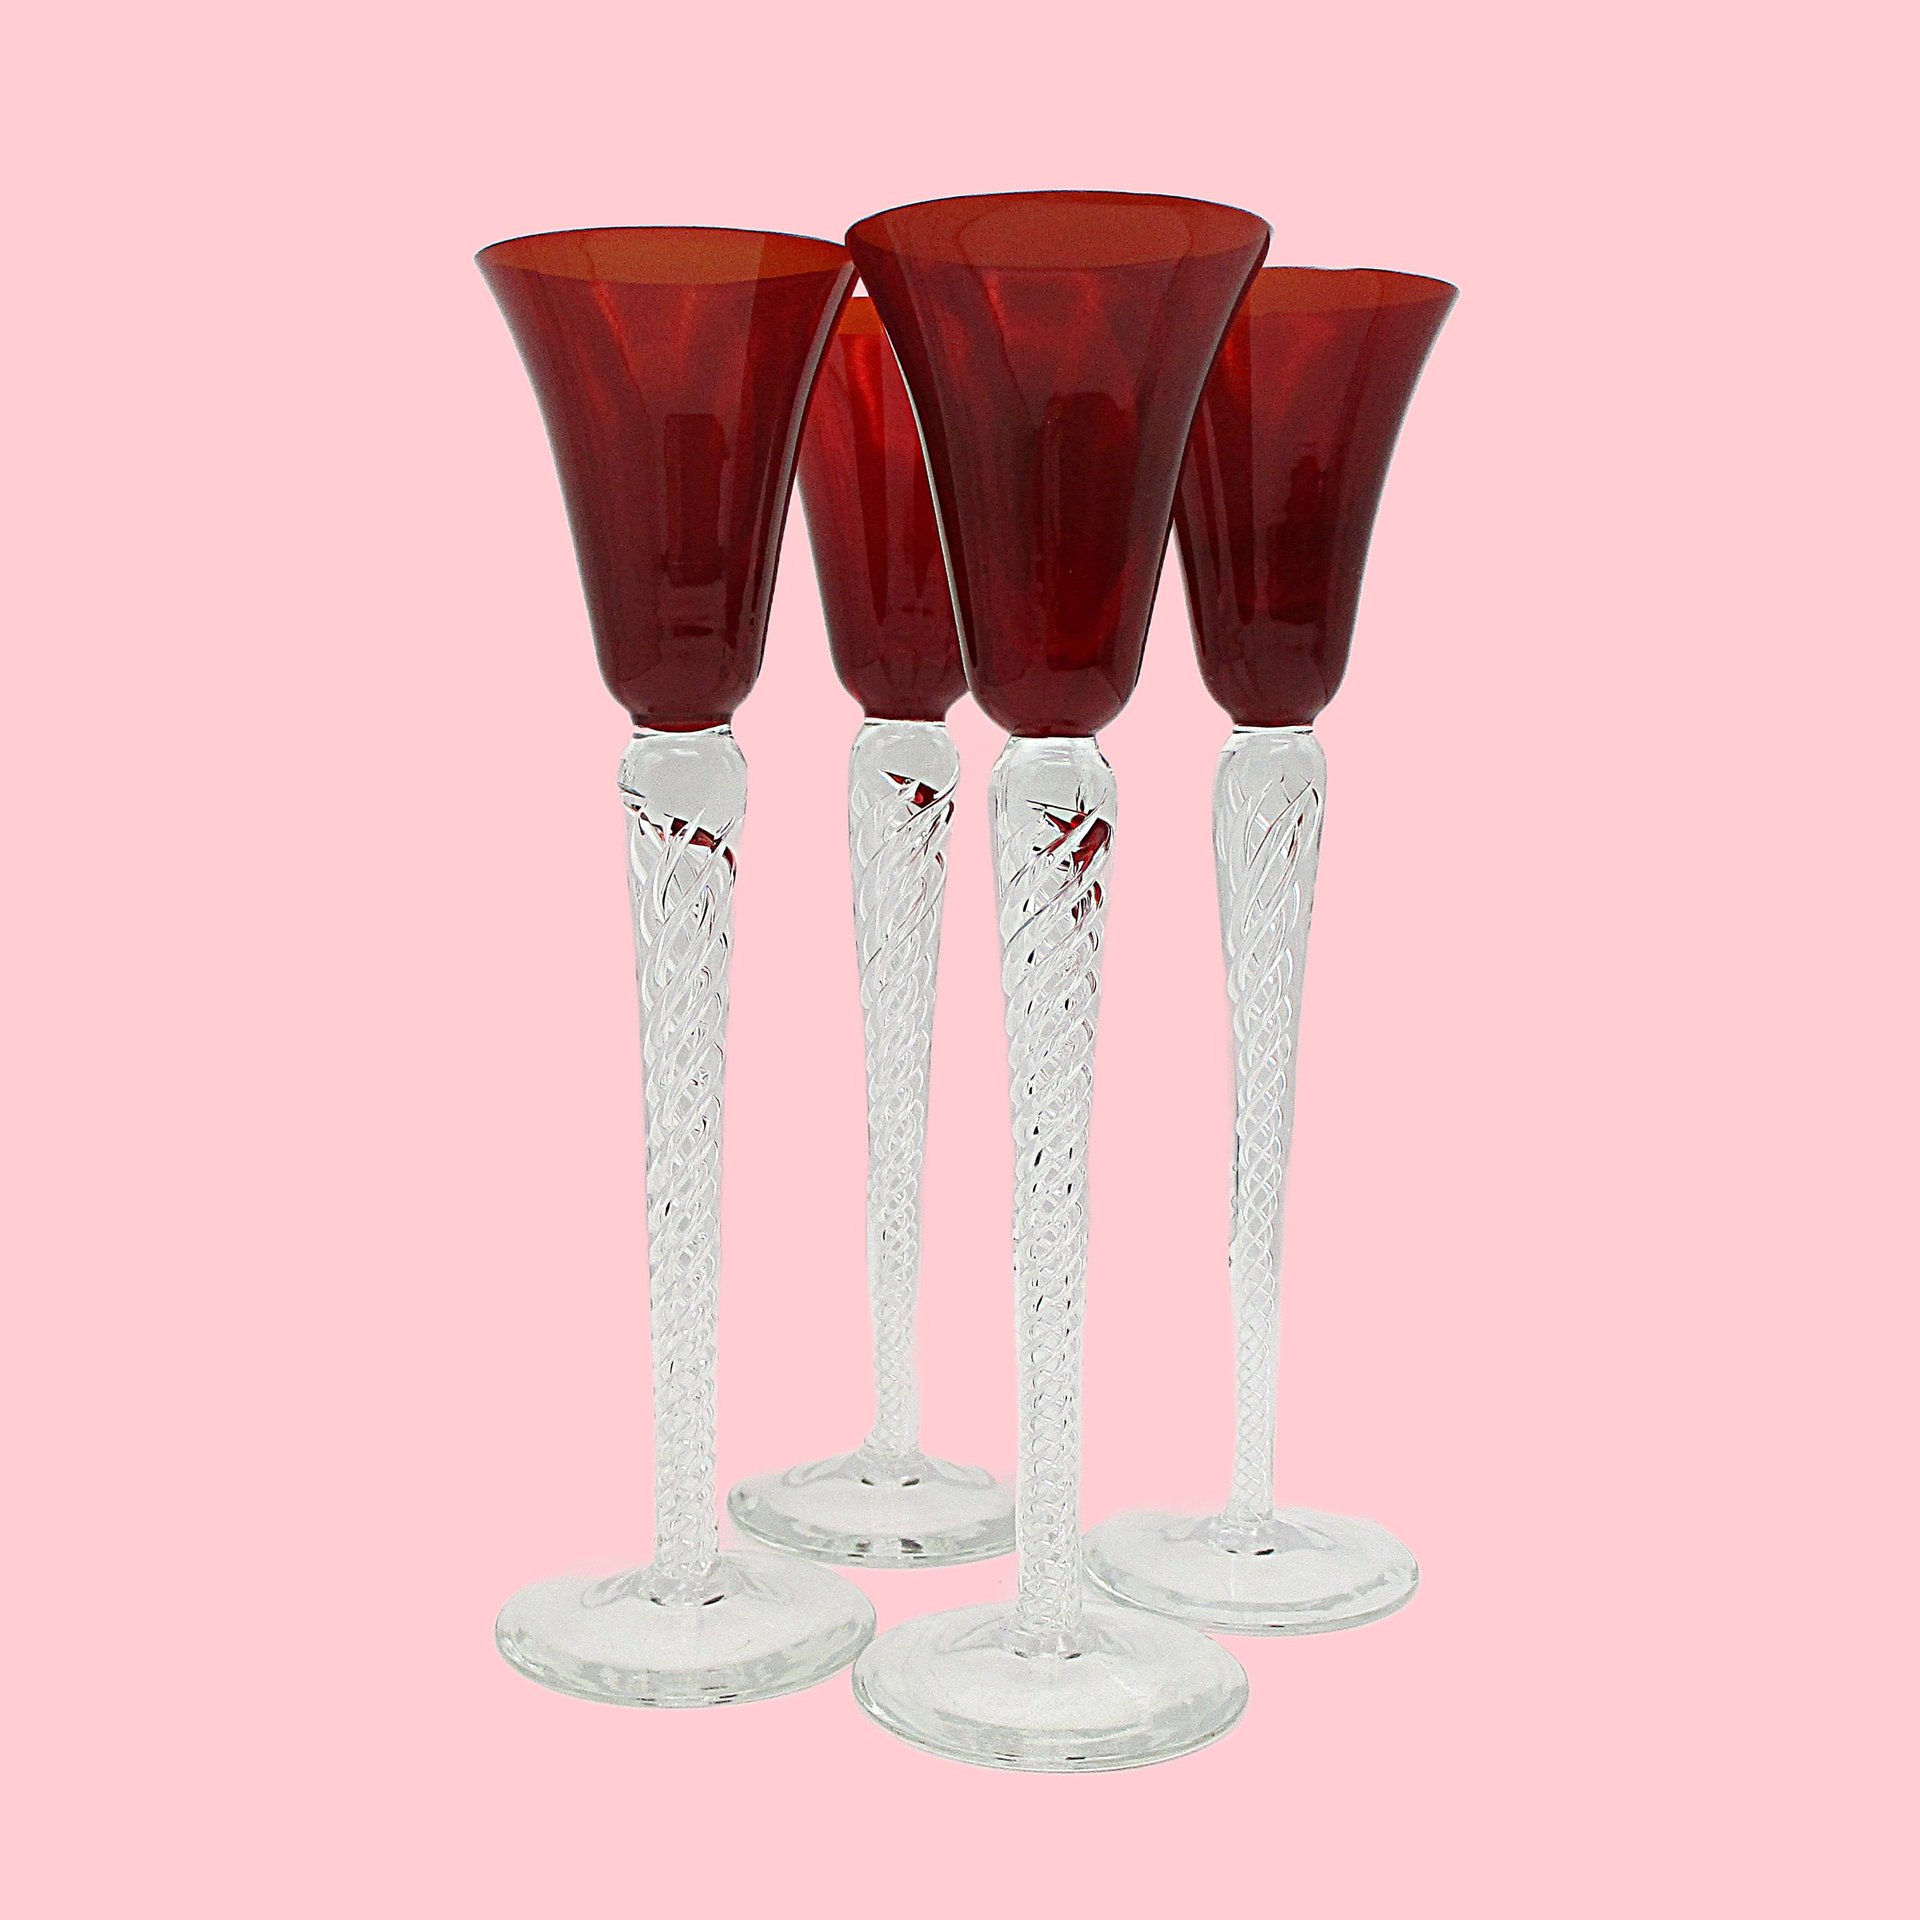 Red Cordials or Liquor Glasses, Long Stemmed, Spiral Stem, Elegant Romantic Barware, Gift for Valentines Day, Excellent Condition, Set of 4